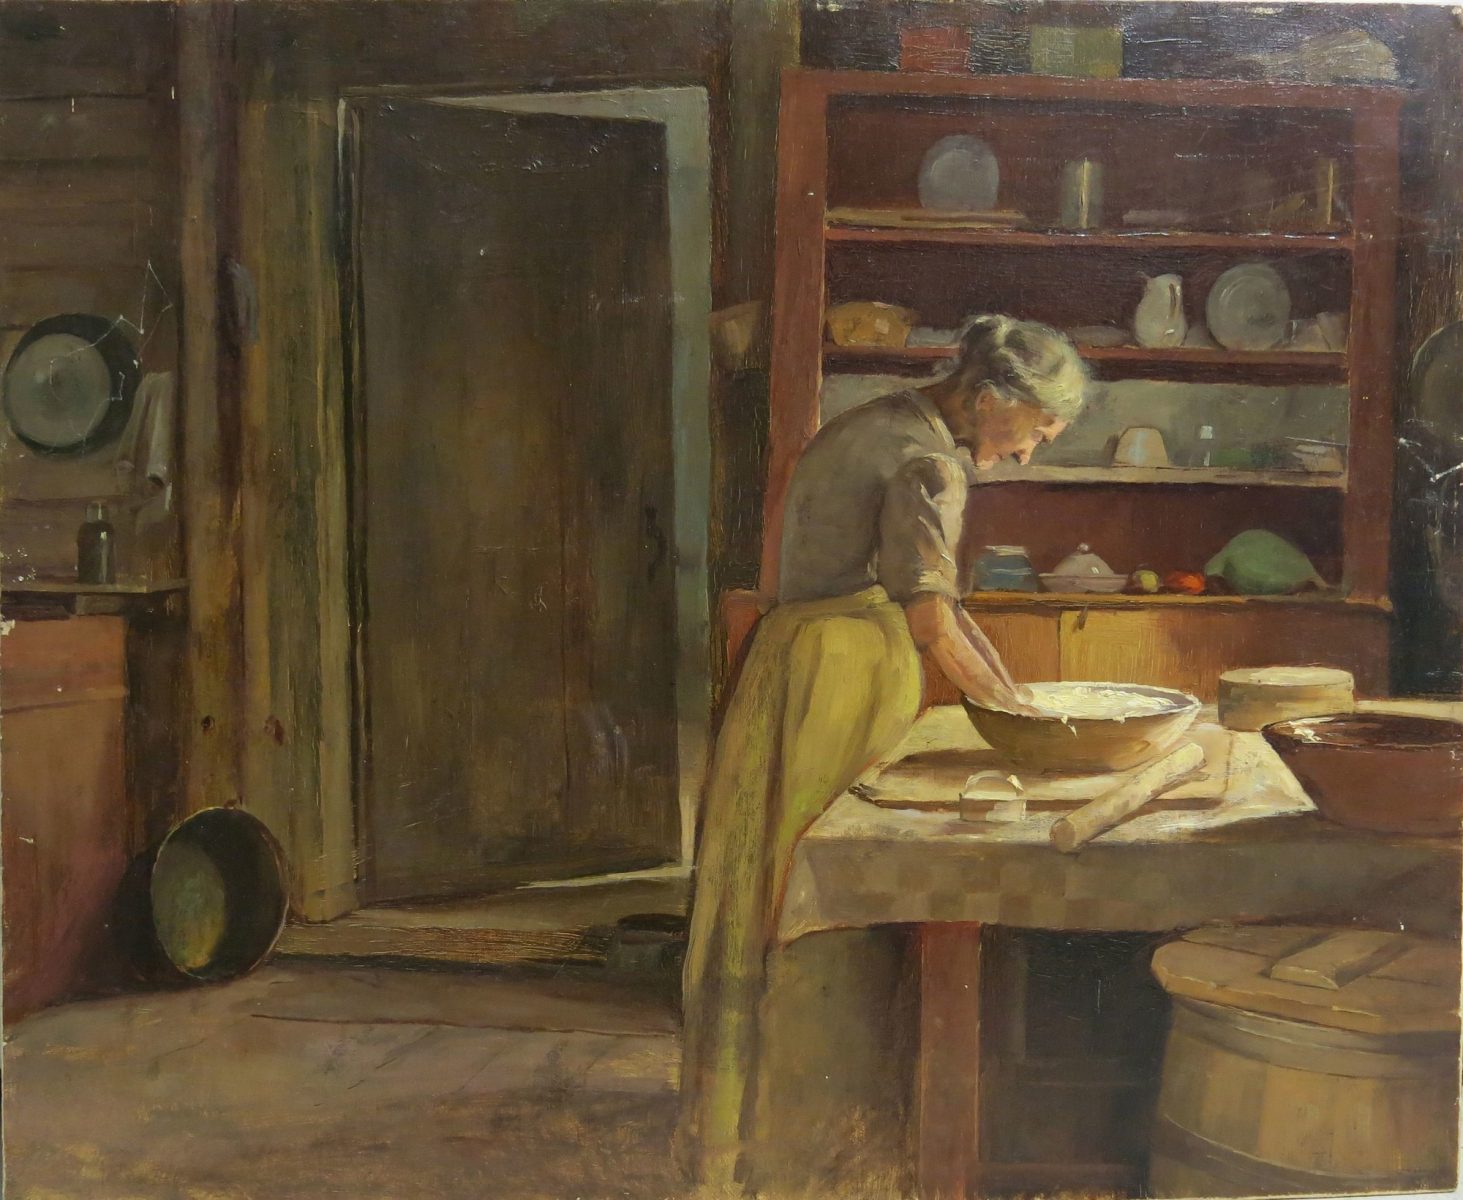 Painting of woman baking bread in the kitchen